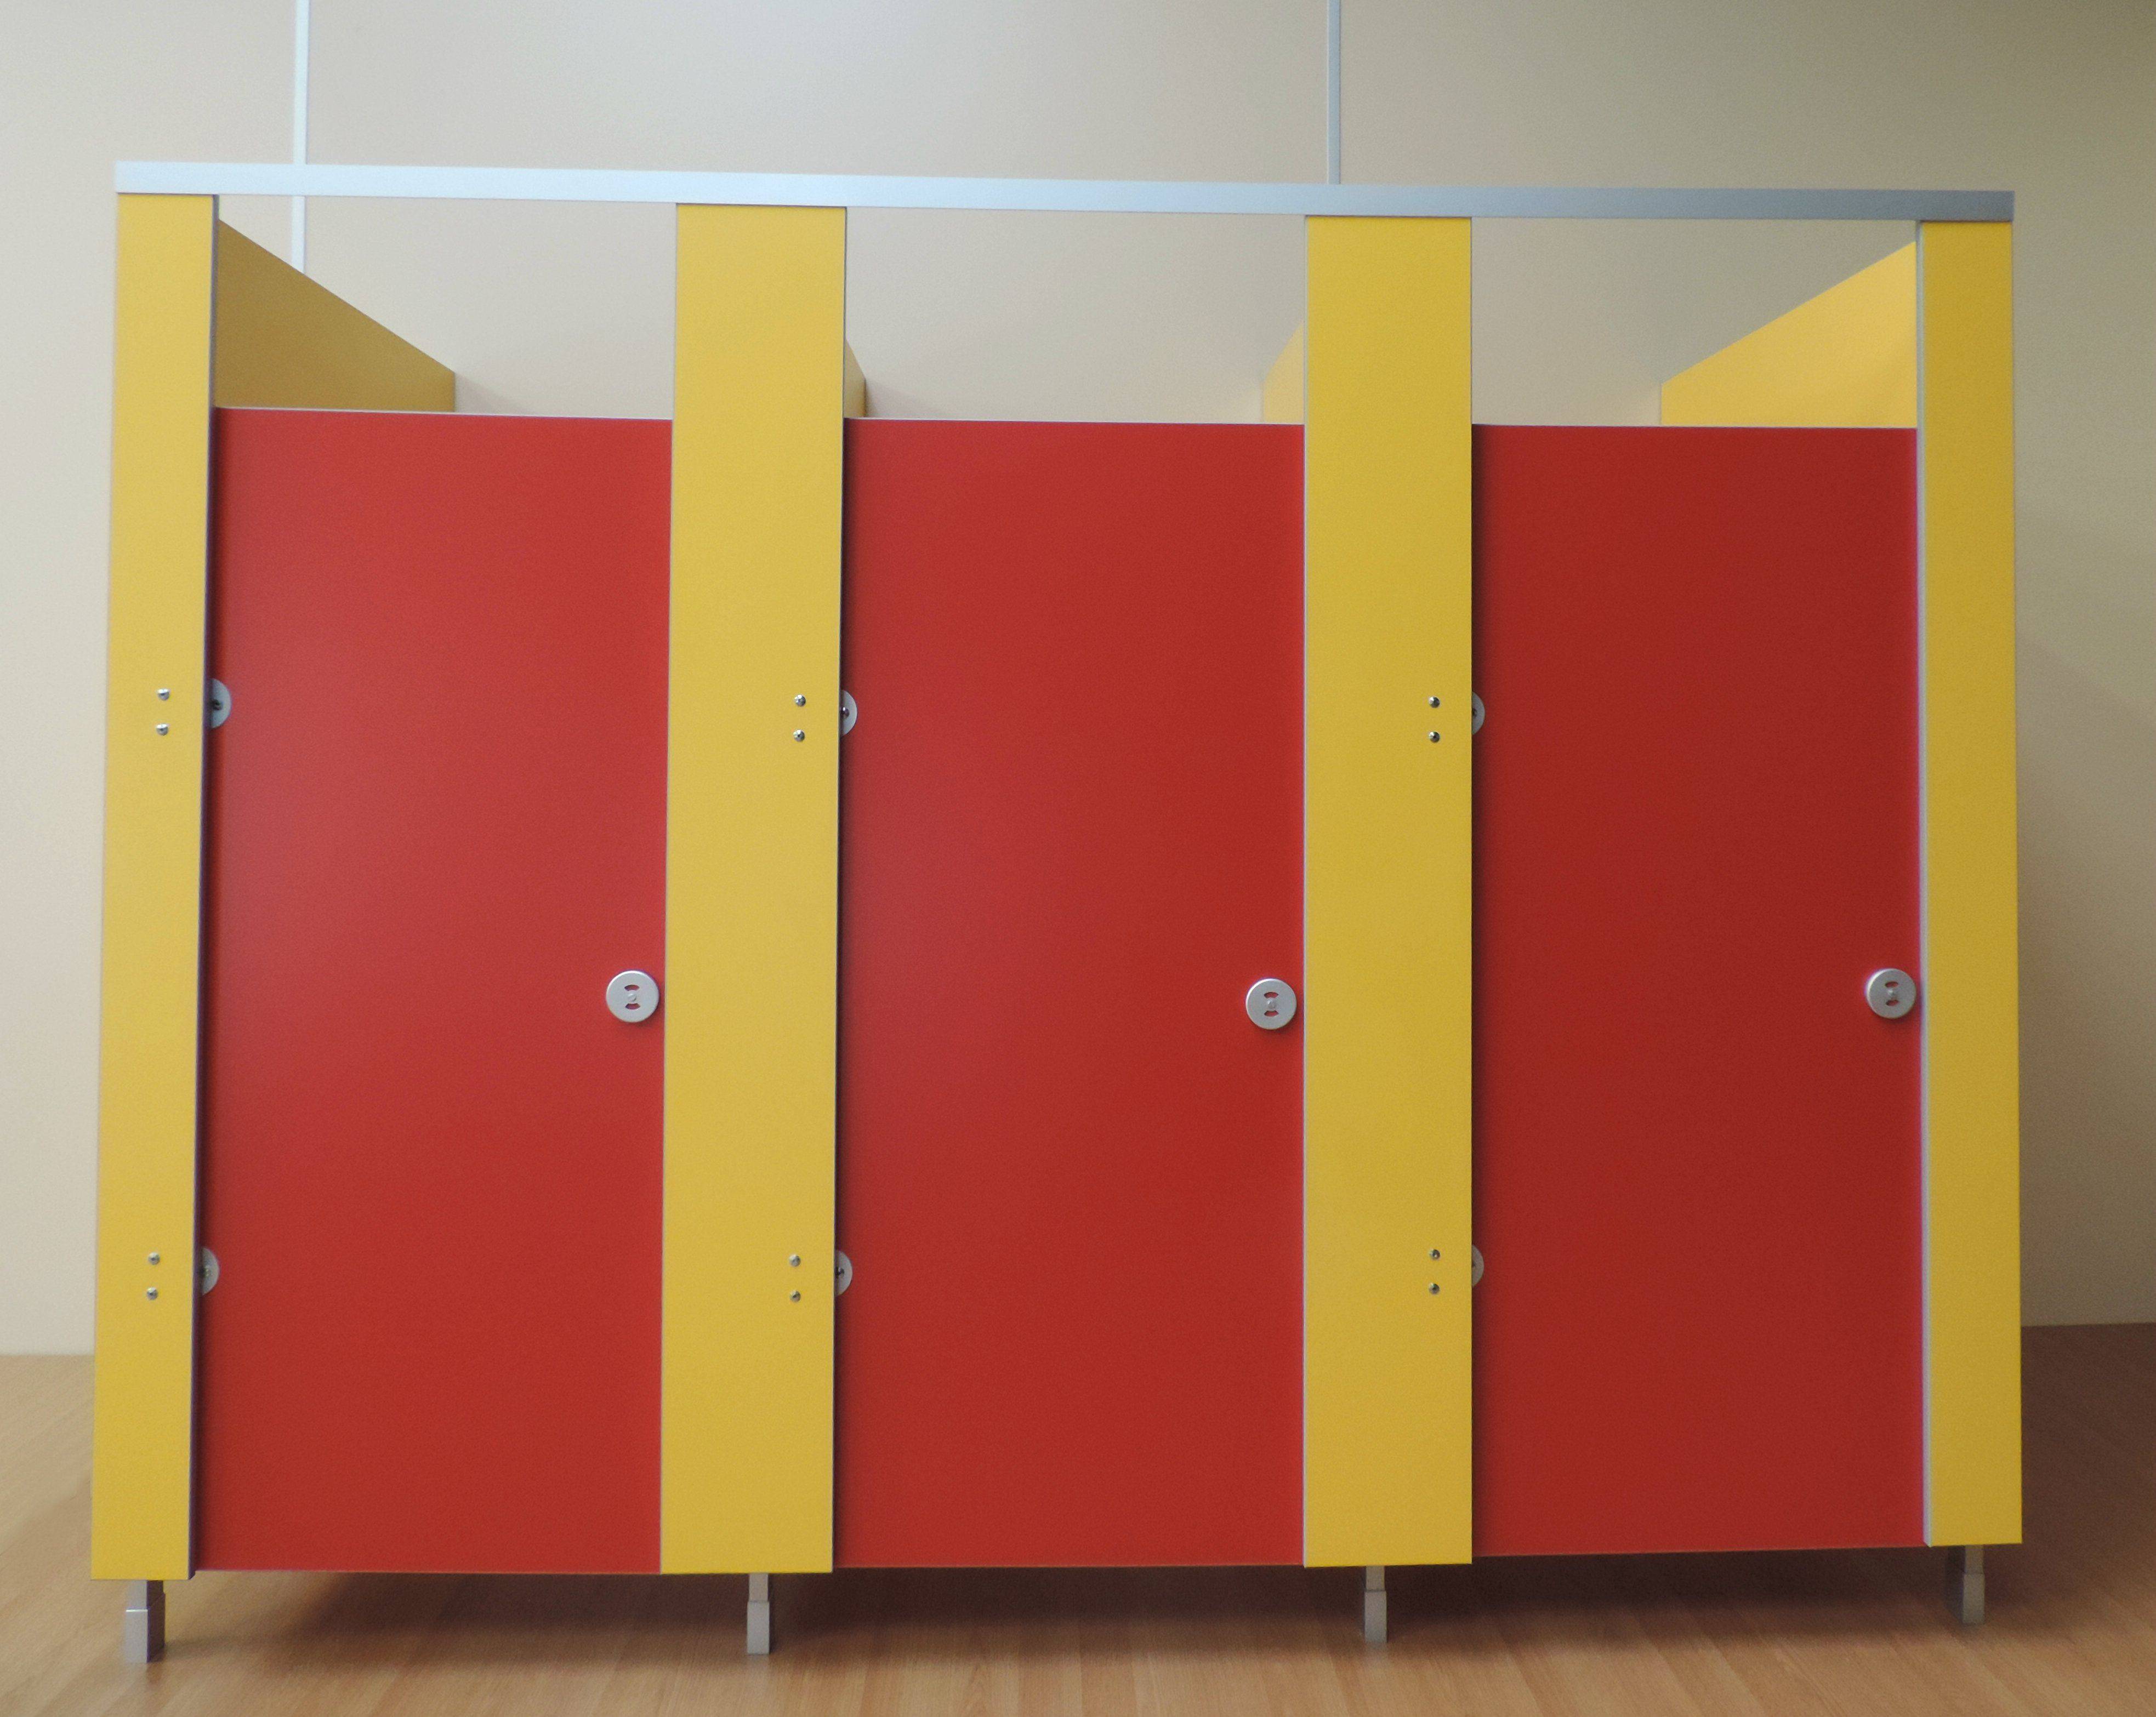 Specialising In Full Size Childrens Toilet Cubicles UK